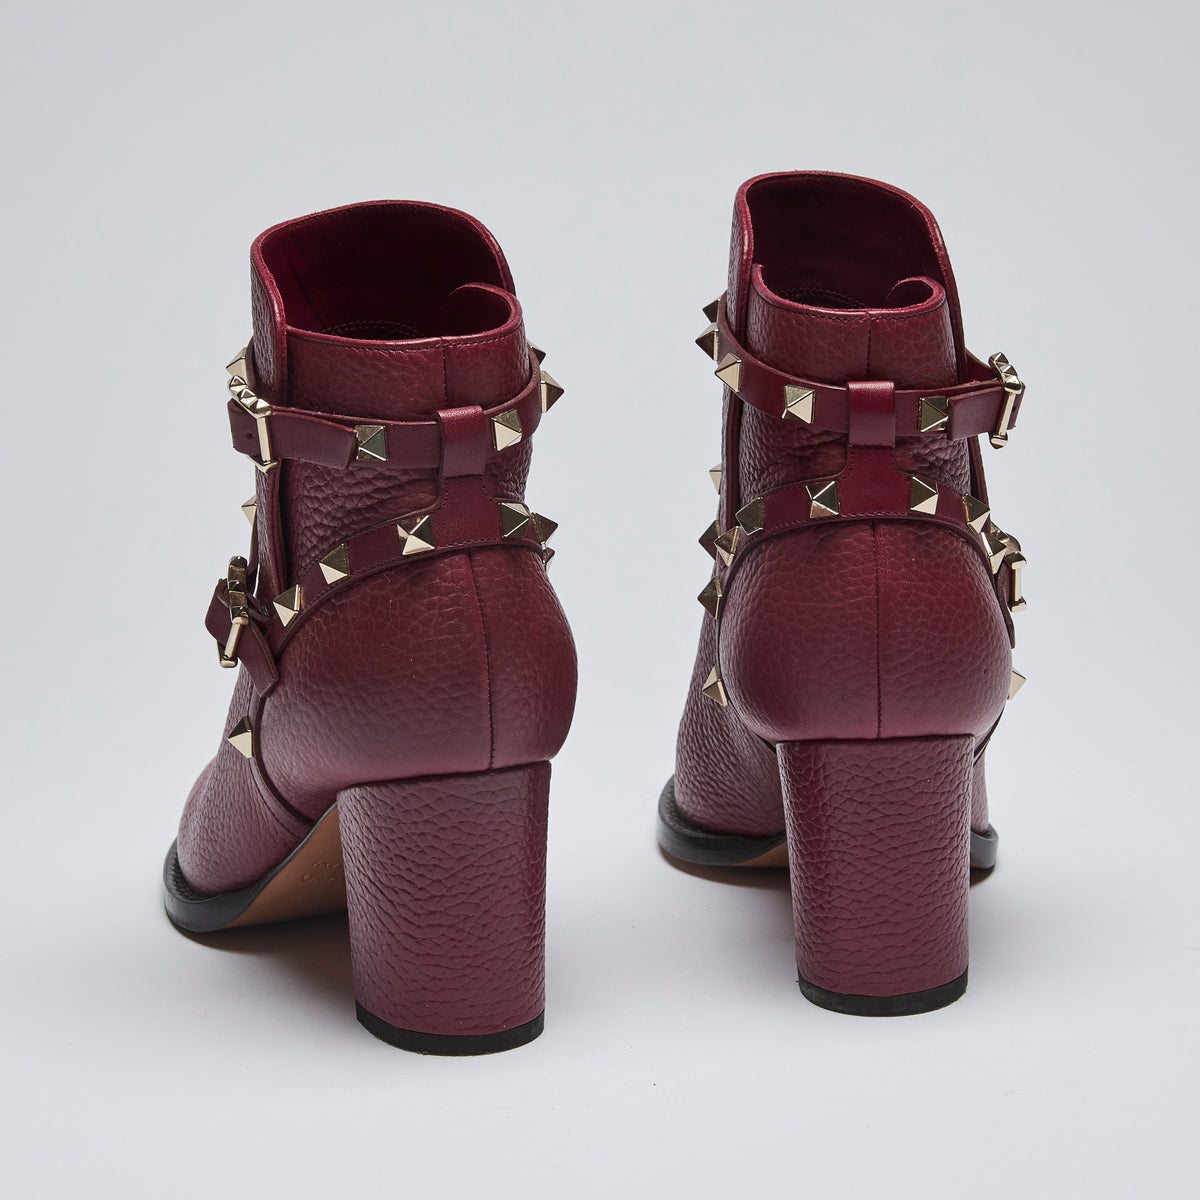 Pre-Loved Burgundy Grained Leather Ankle Boots with Studded Ankle Straps.(back)